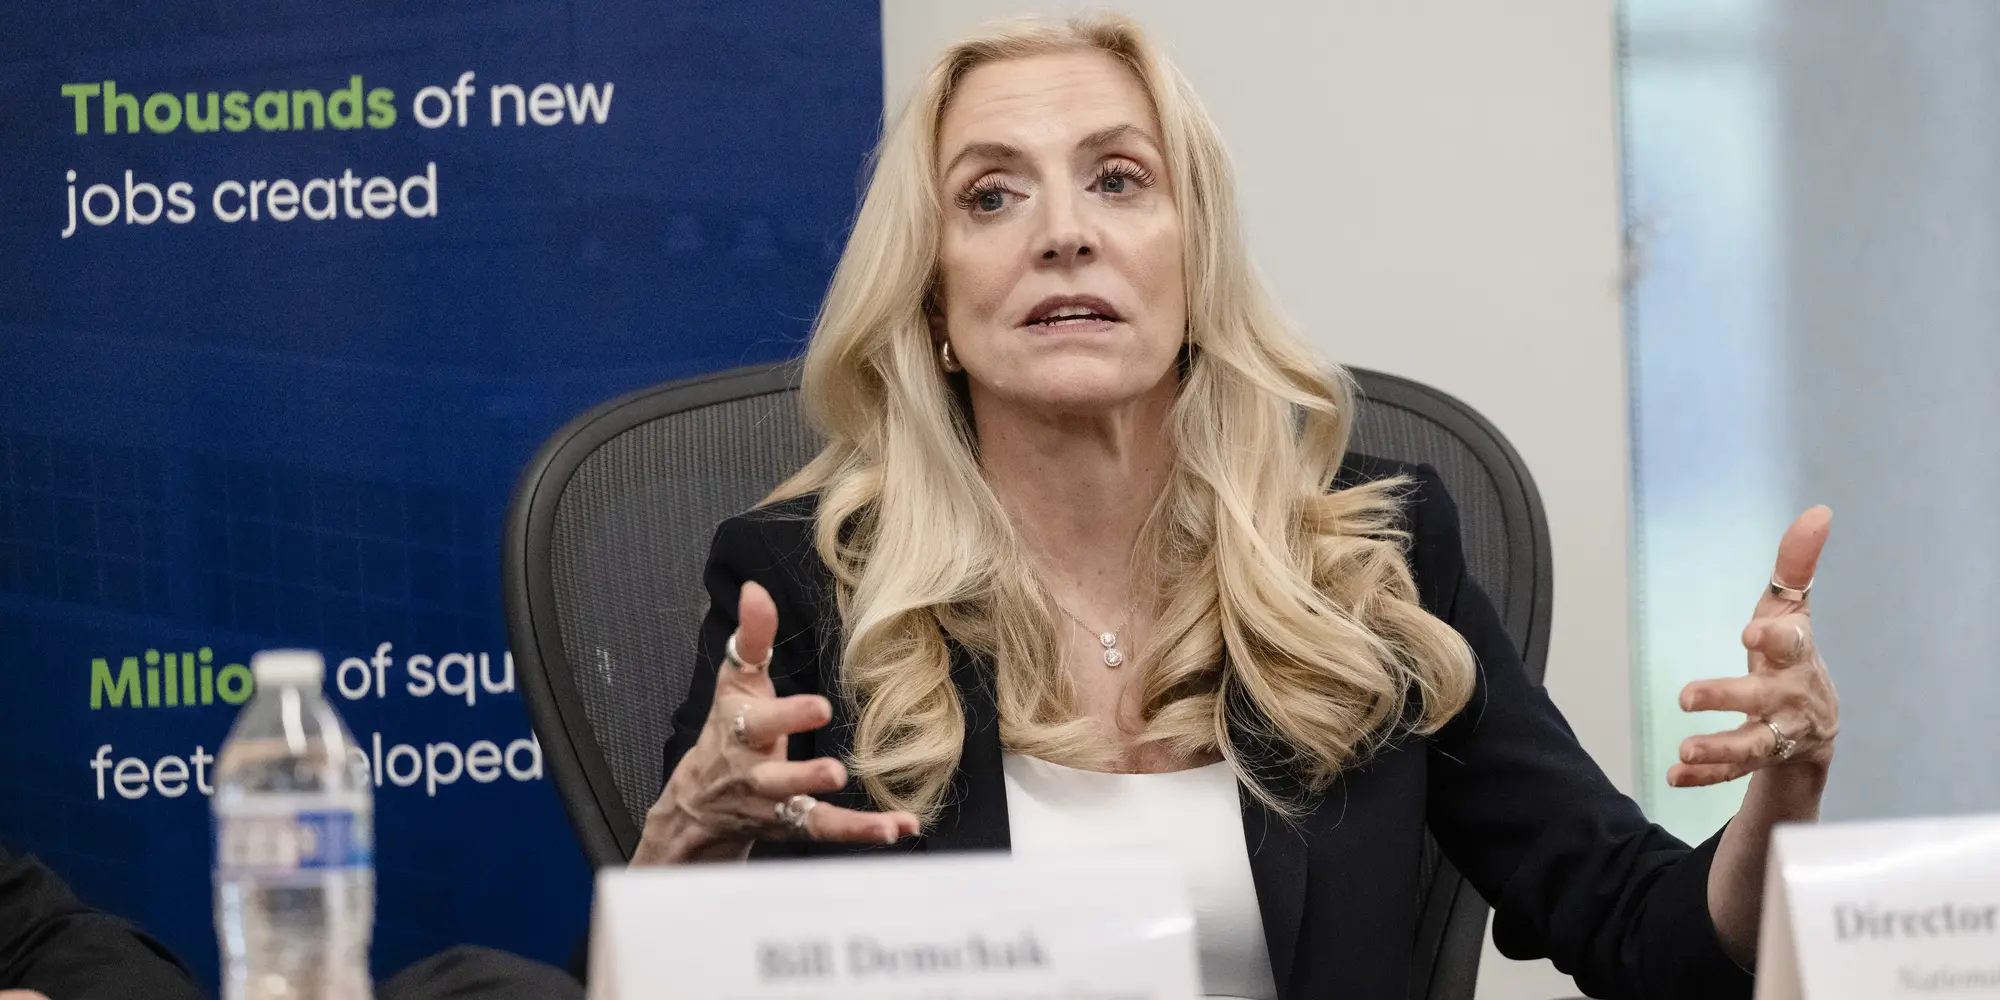 A white woman with long wavy blonde hair sits at a table behind a name placard with her hands raised to gesture while speaking.